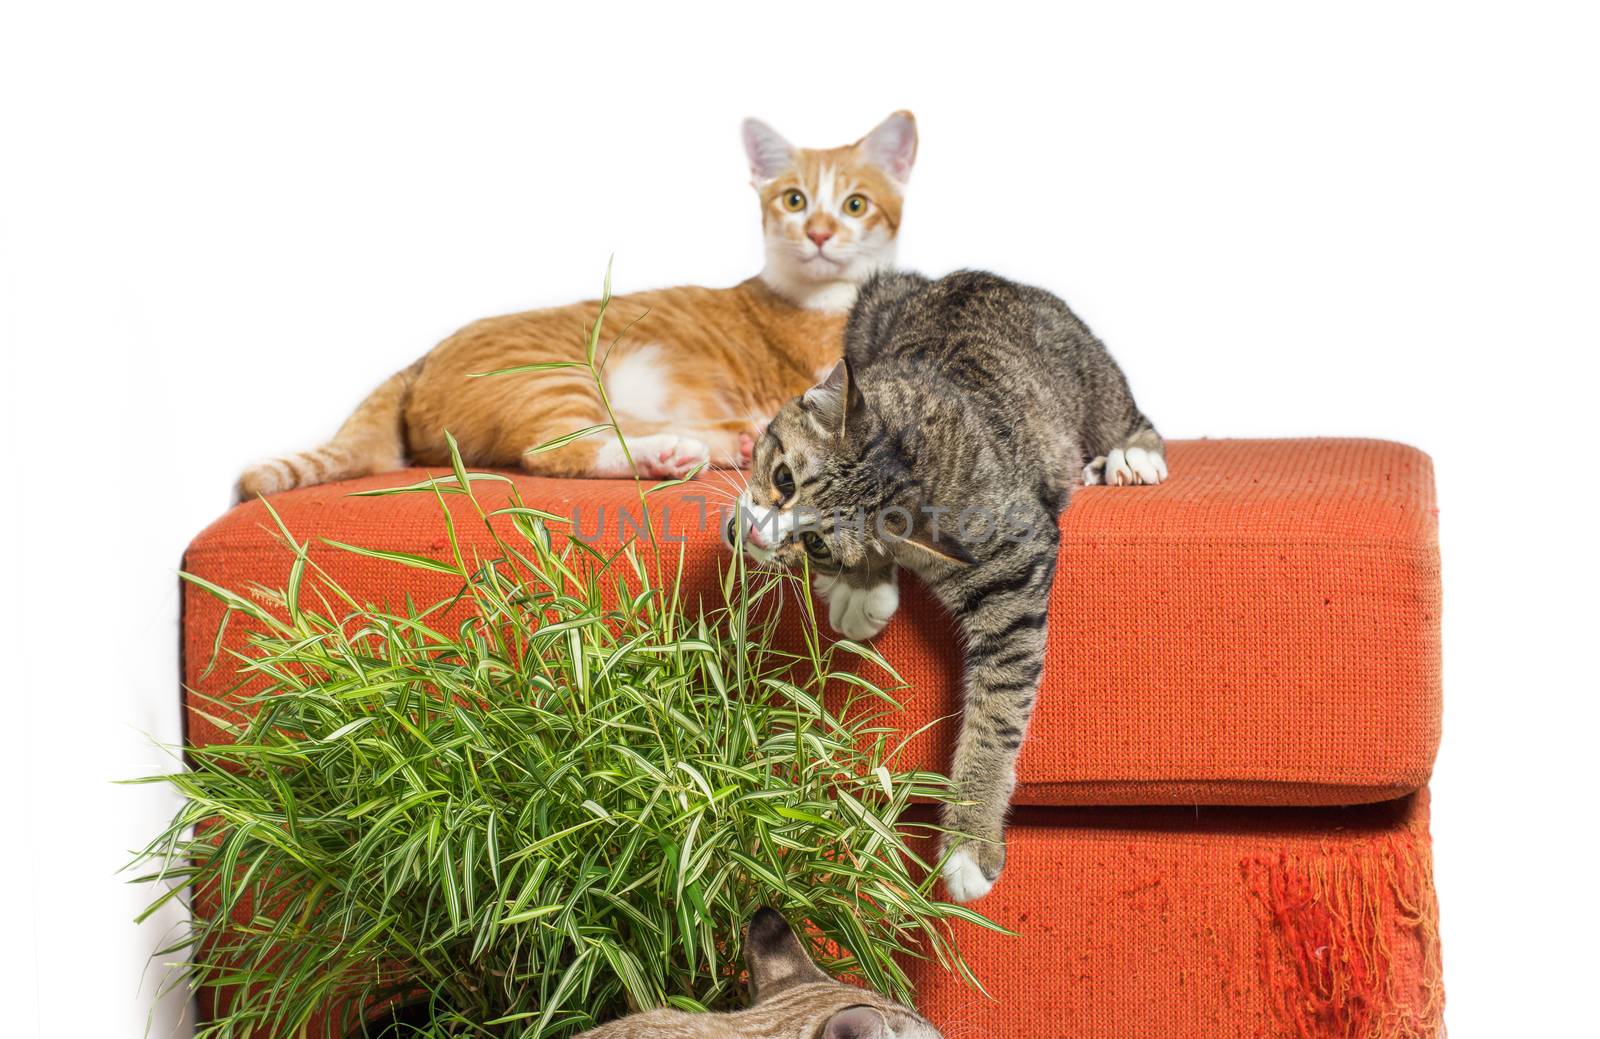 Kittens eating bamboo leaves on scratched orange fabric sofa white background